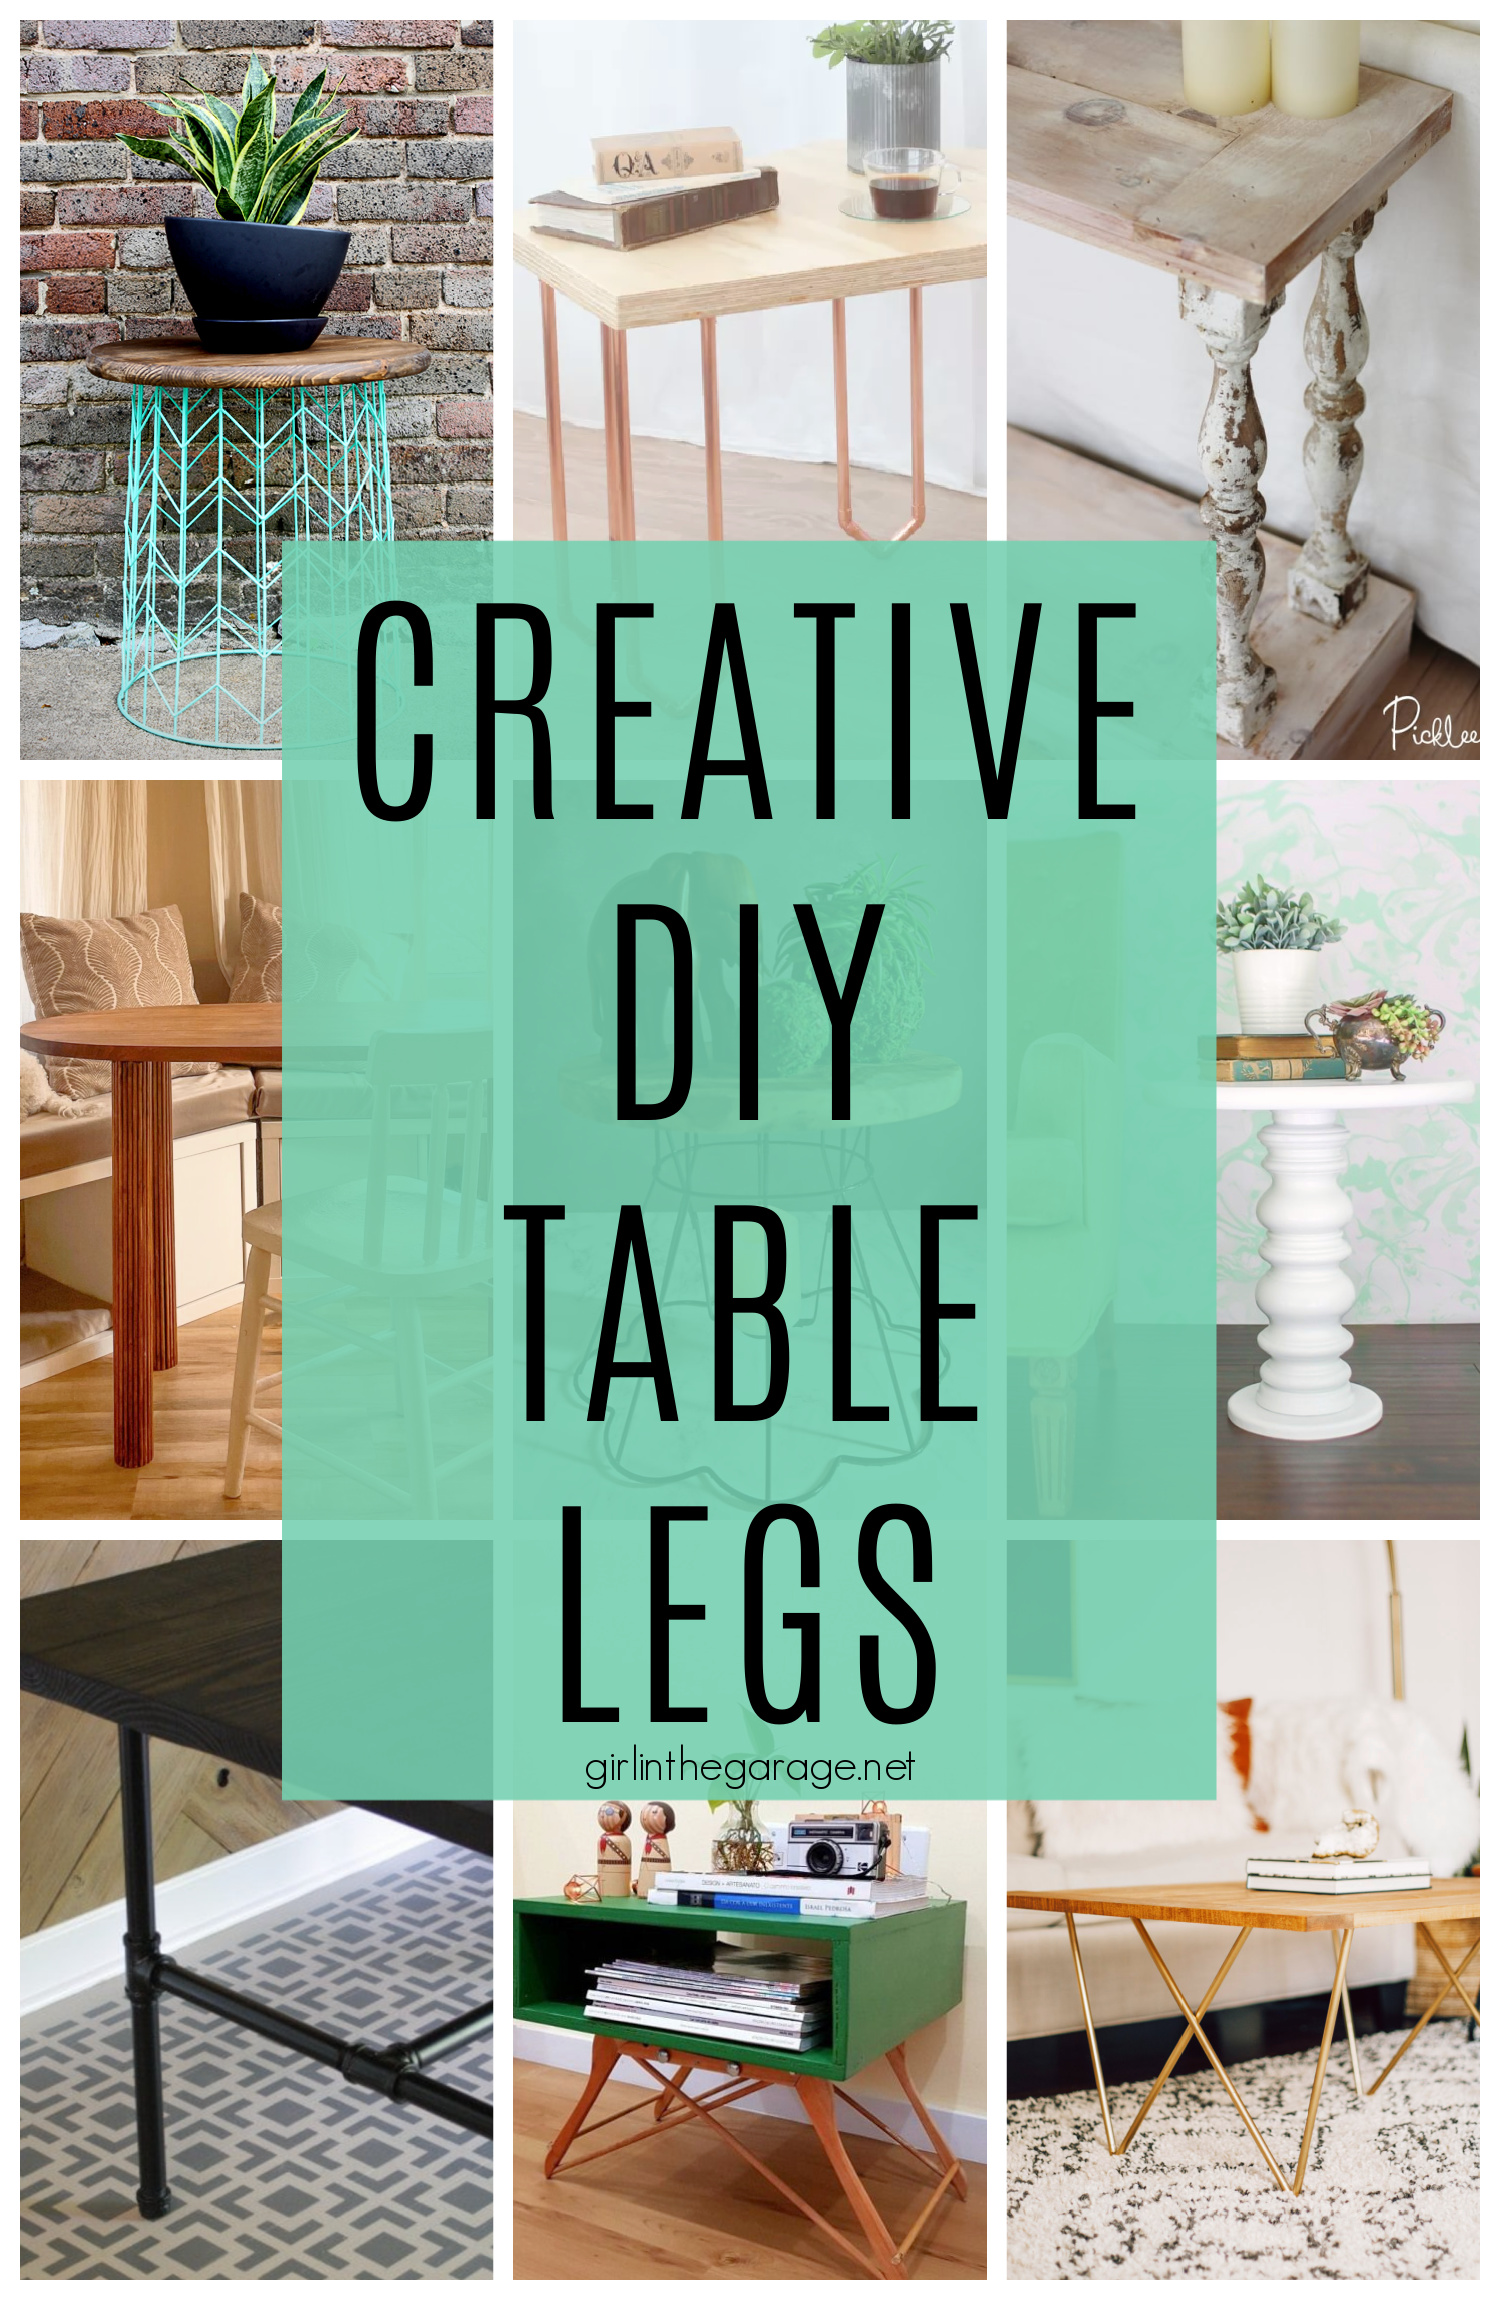 Give a boring old table or new woodworking project an exciting update with creative table legs. Find DIY table leg ideas and inspo from Girl in the Garage.